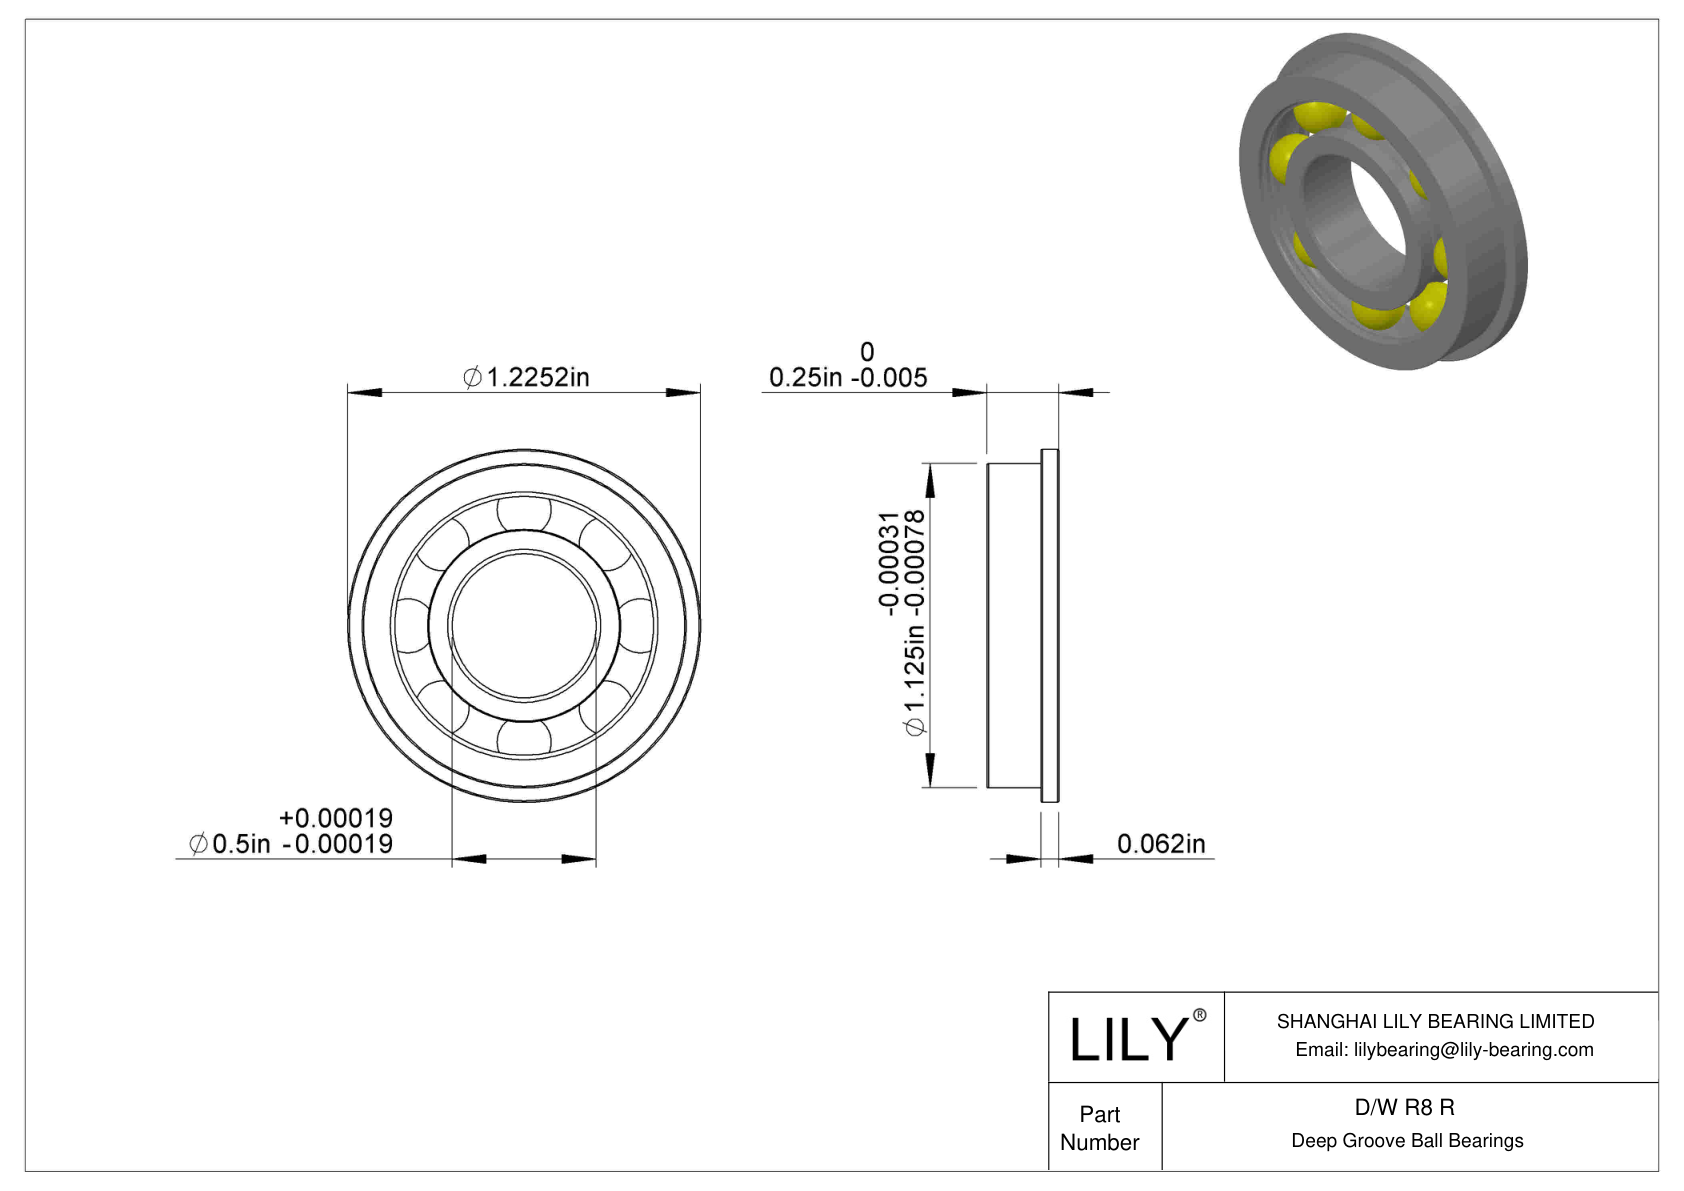 D/W R8 R Flanged Ball Bearings cad drawing